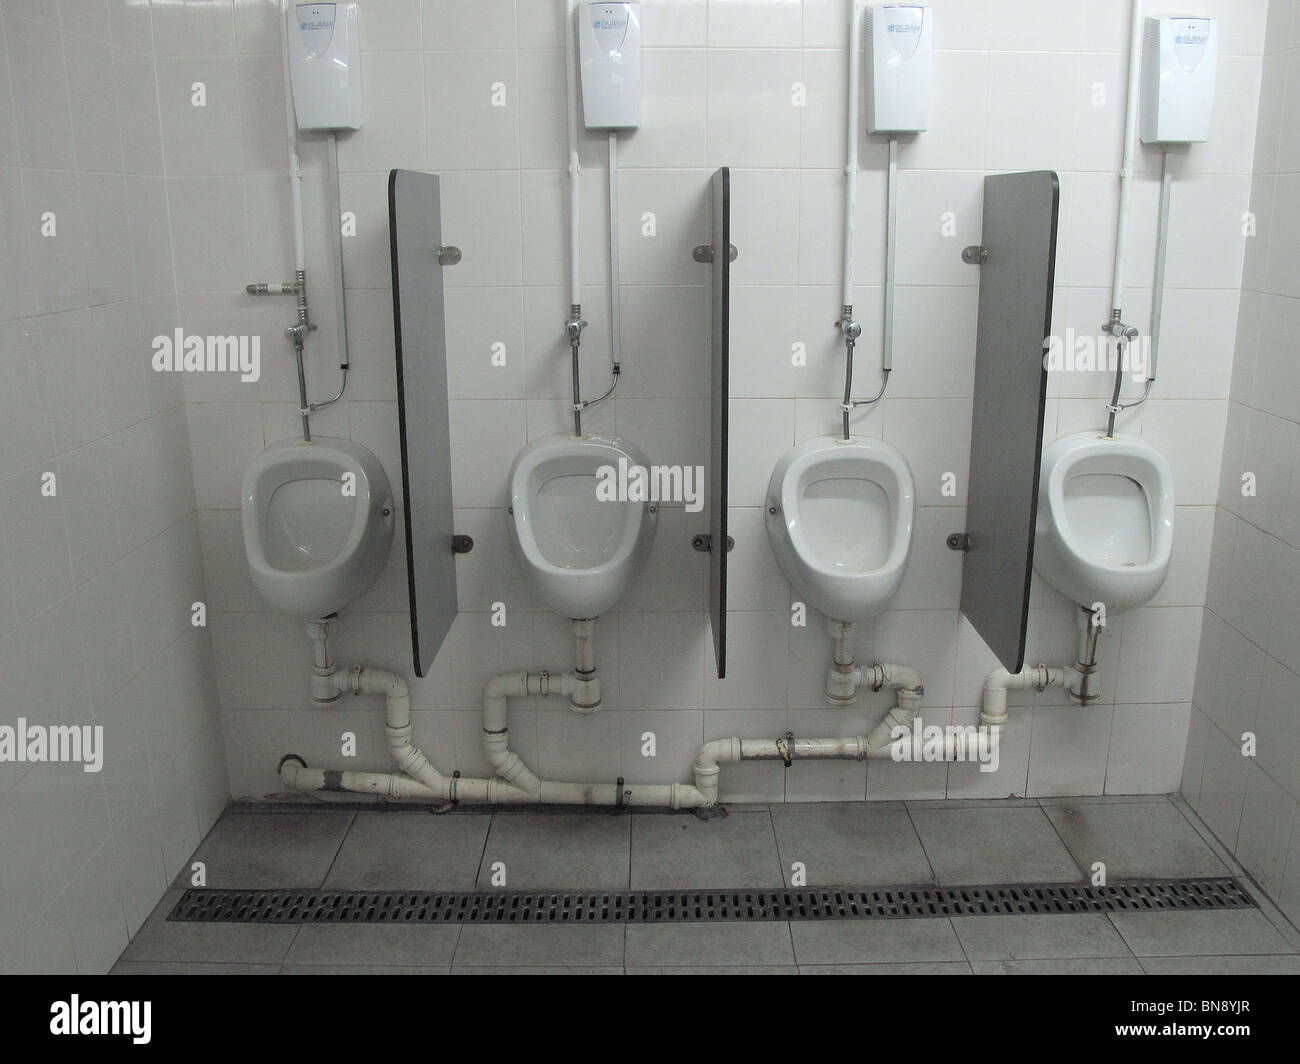 Mens Urinals in Portugal Public Toilets Stock Photo